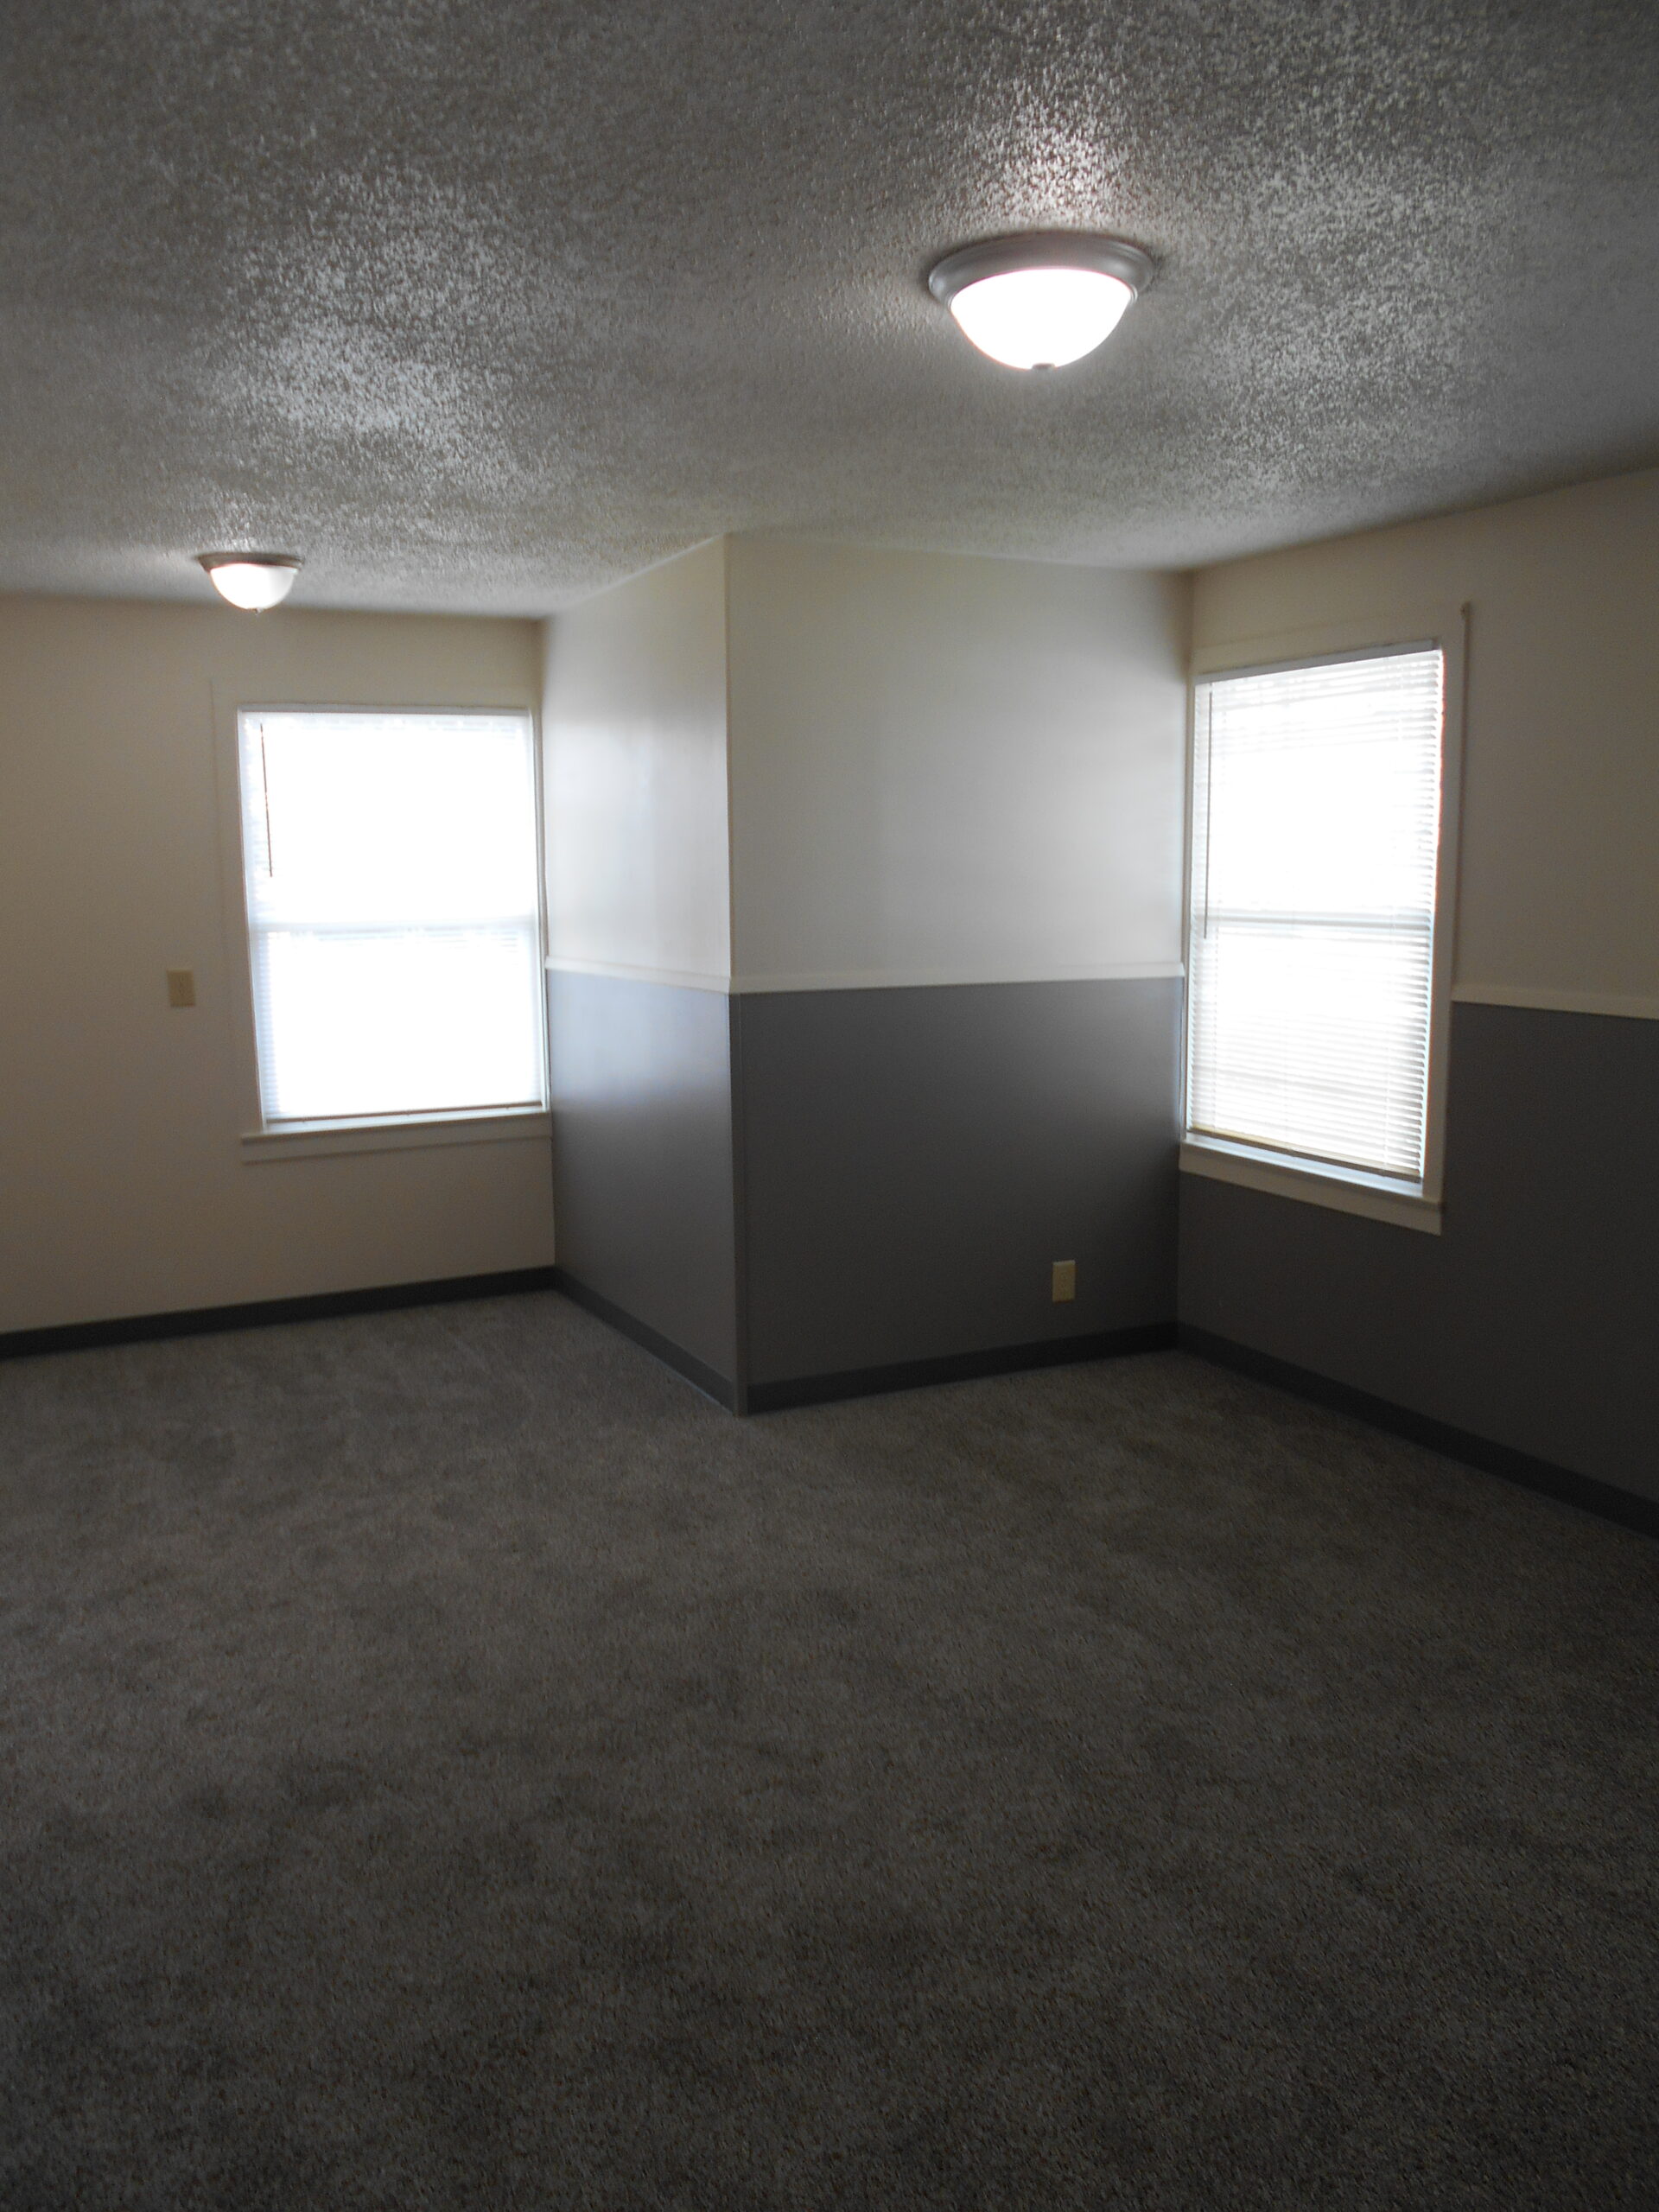 $1,499 – COMPLETELY REMODELED! 2 BEDROOM DUPLEX IN TACOMA